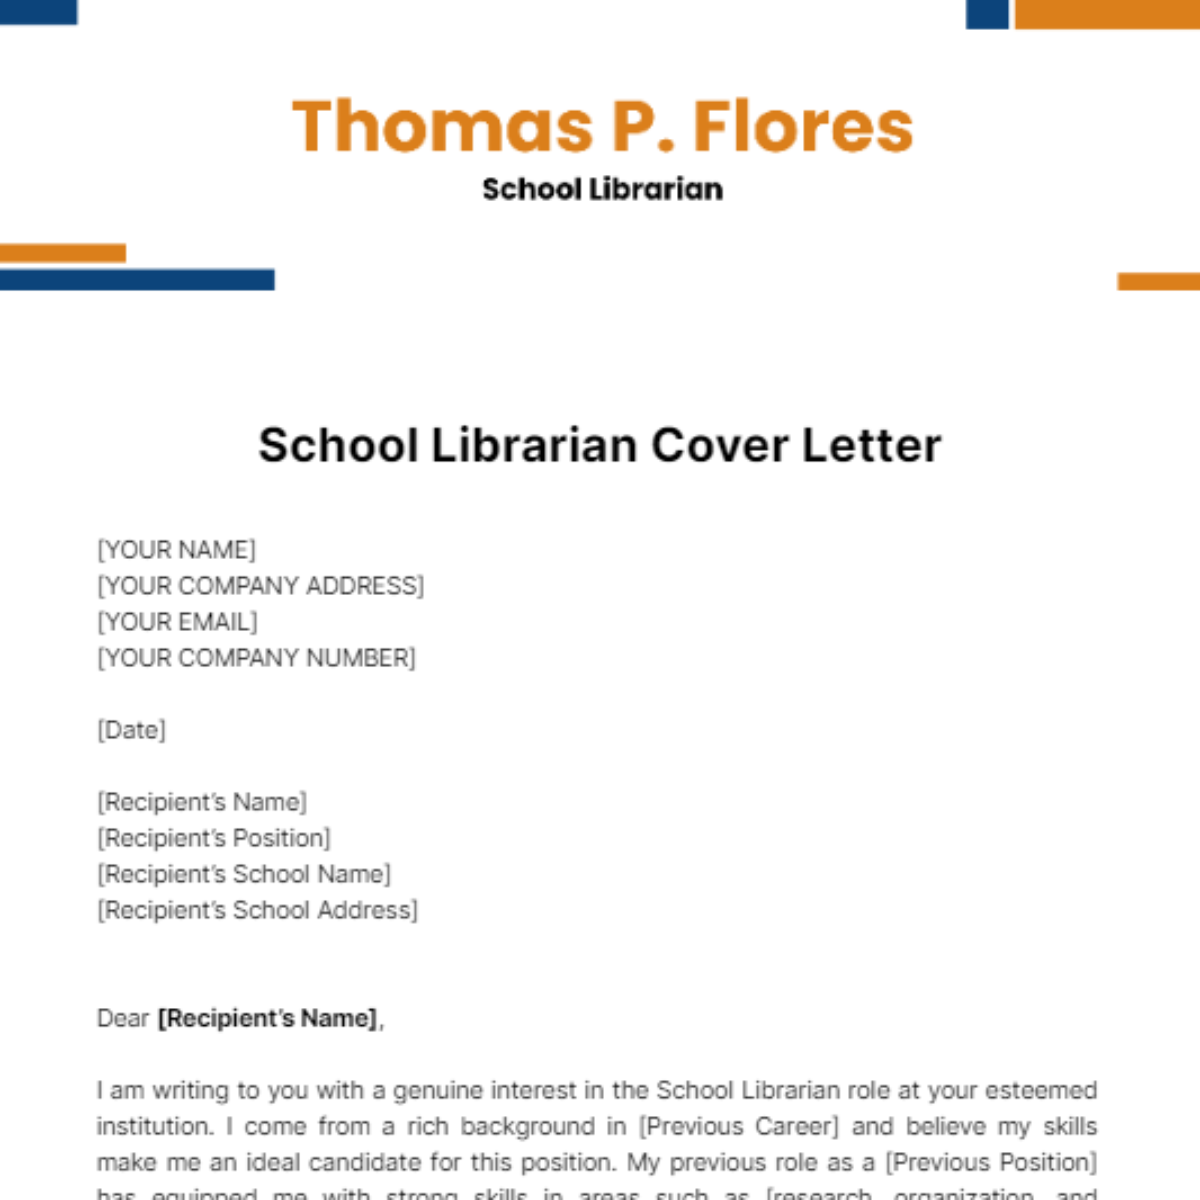 School Librarian Cover Letter Template